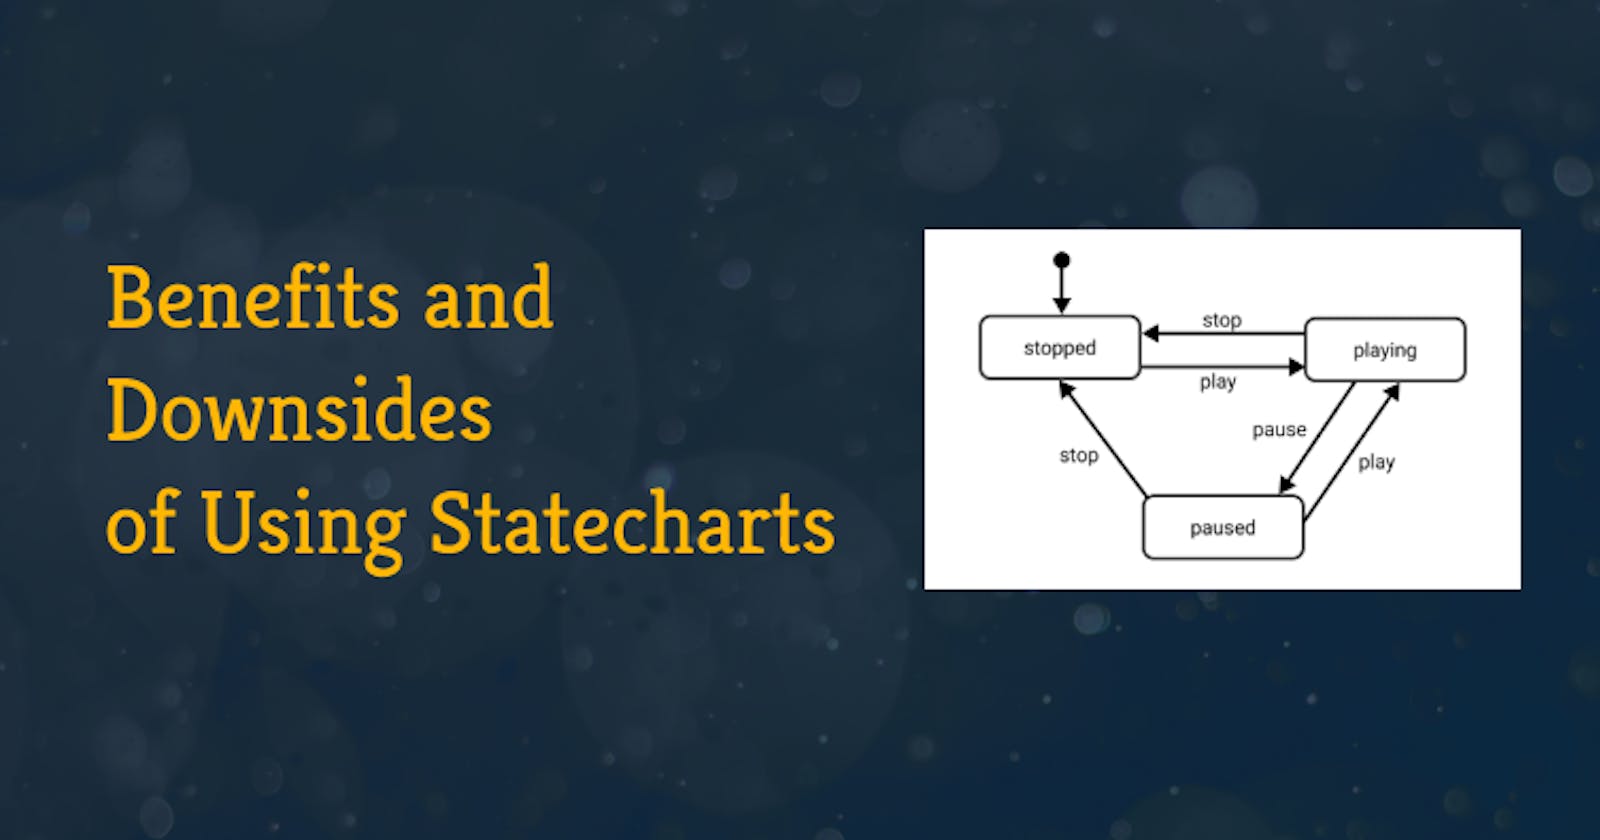 Benefits and Downsides of Using Statecharts